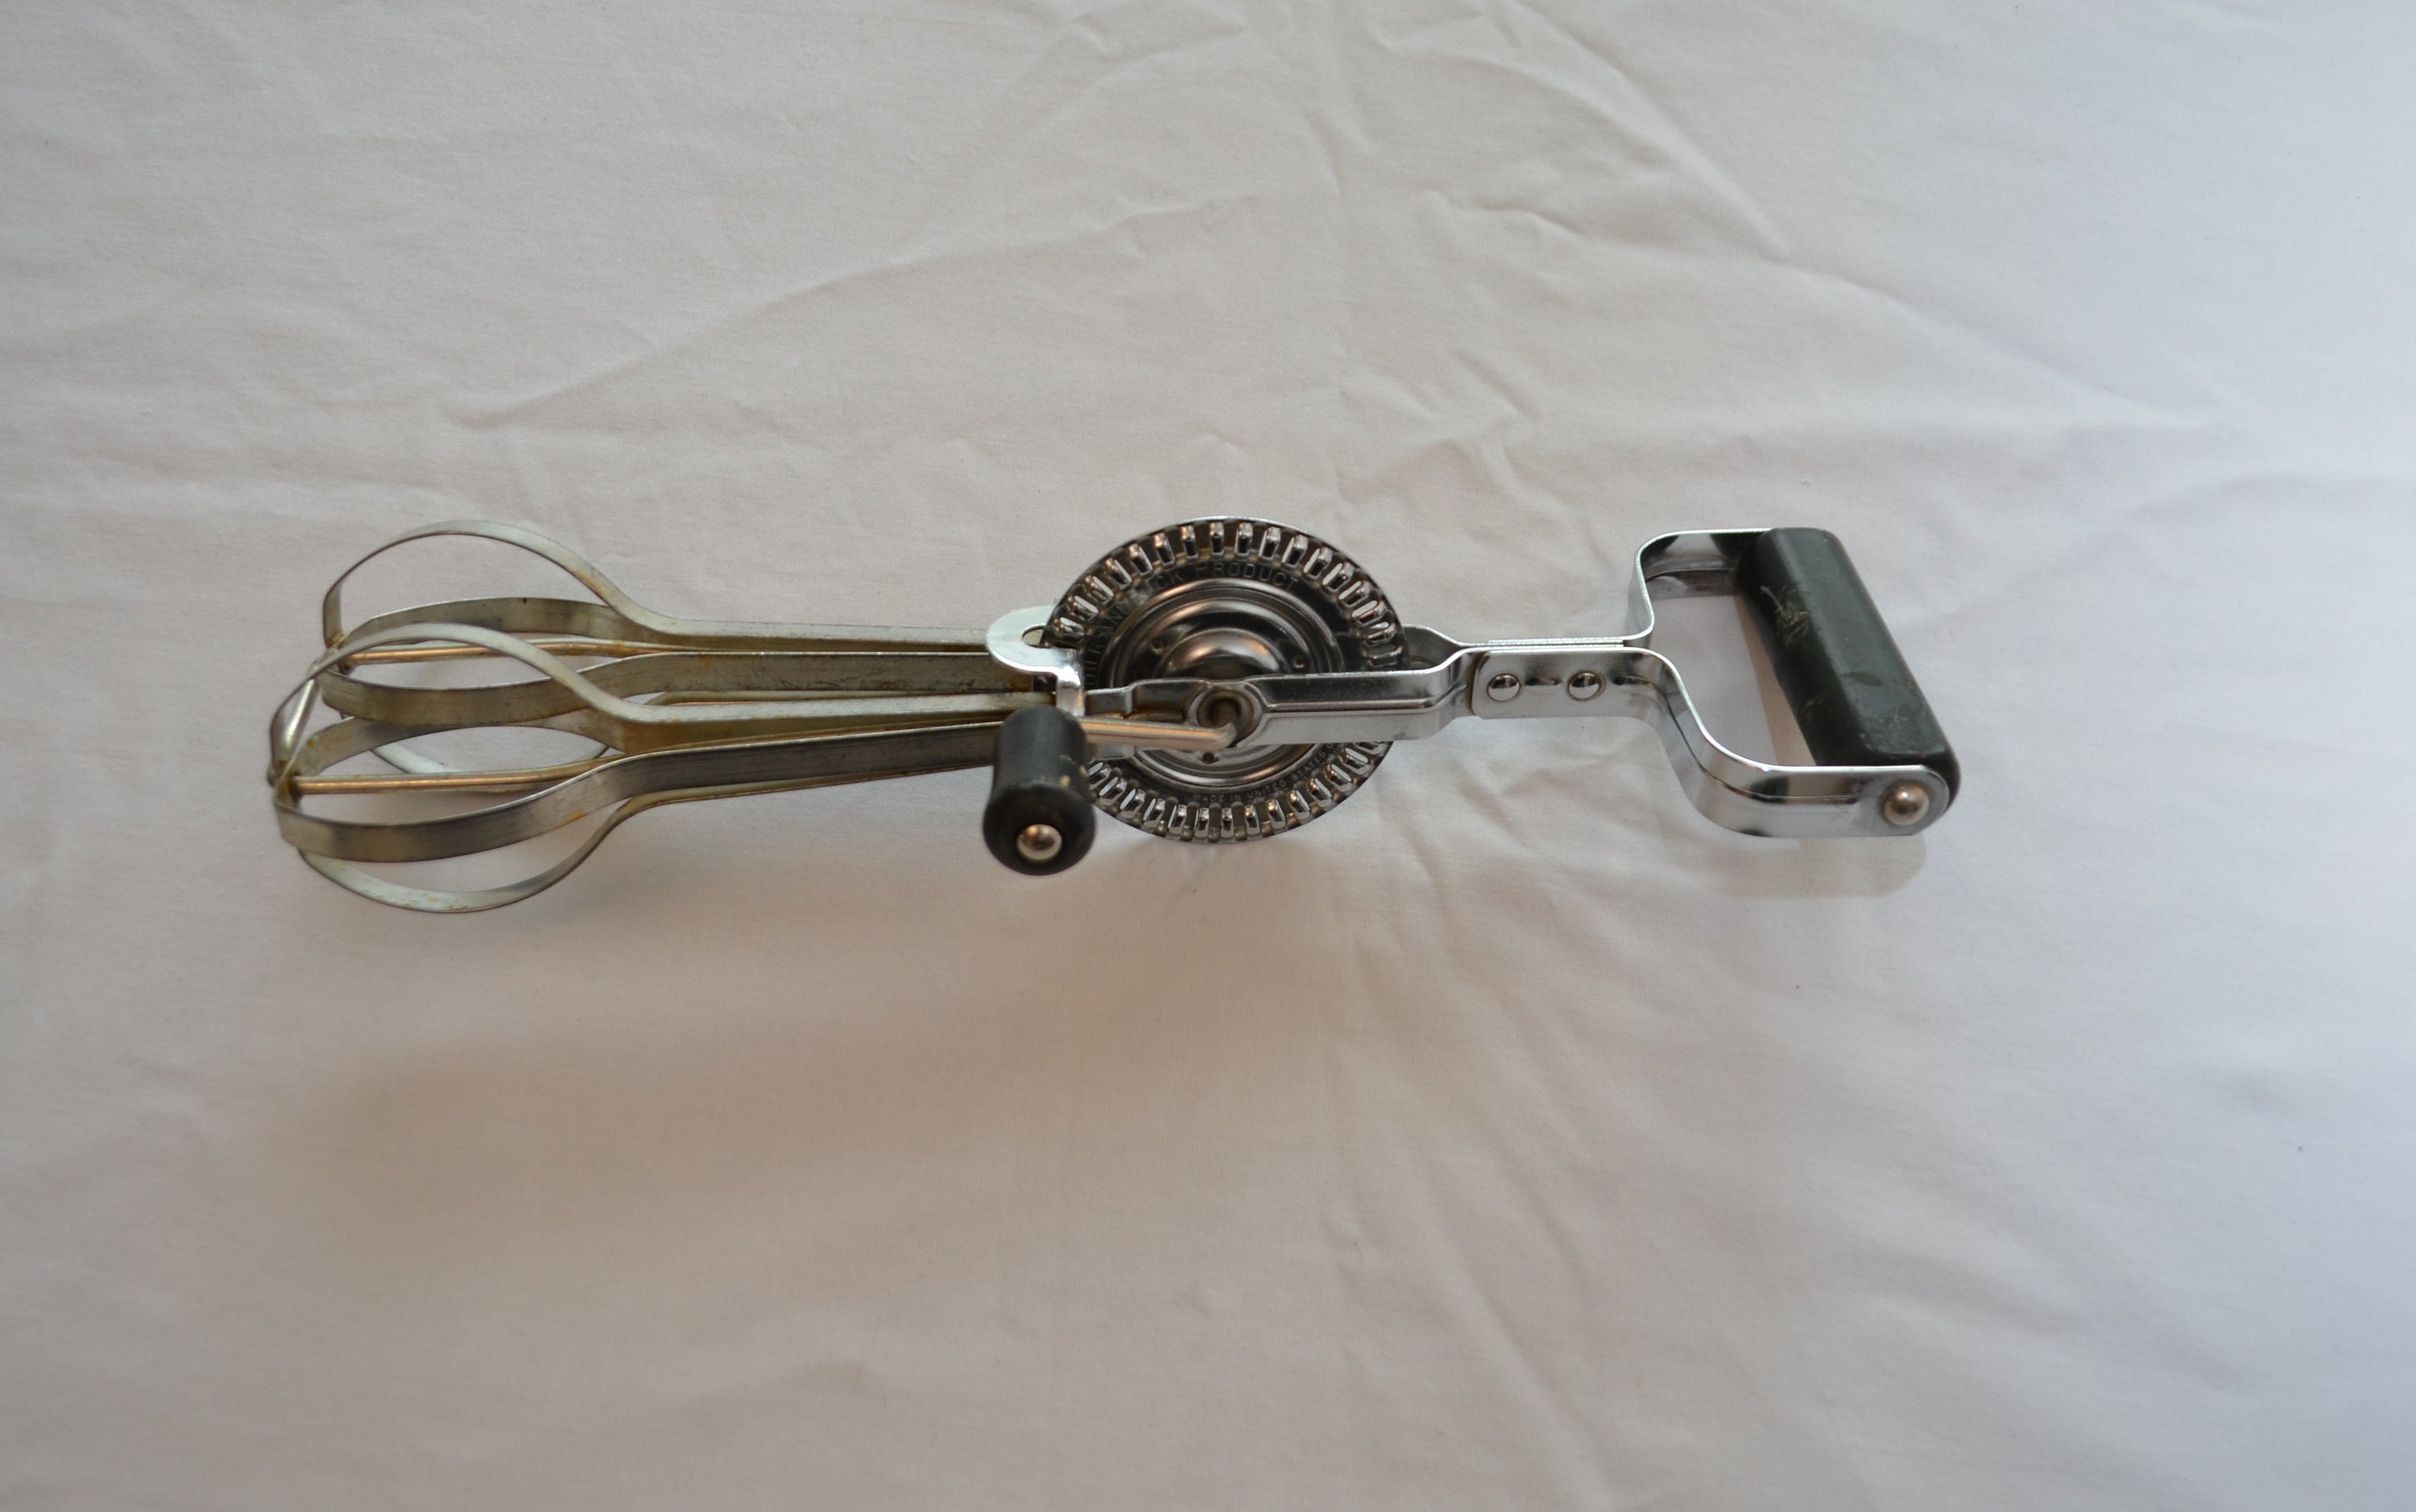 VINTAGE ANDROCK GREEN WOOD HANDLE EGG BEATER HAND MIXER NON ELECTRIC  SURVIVAL